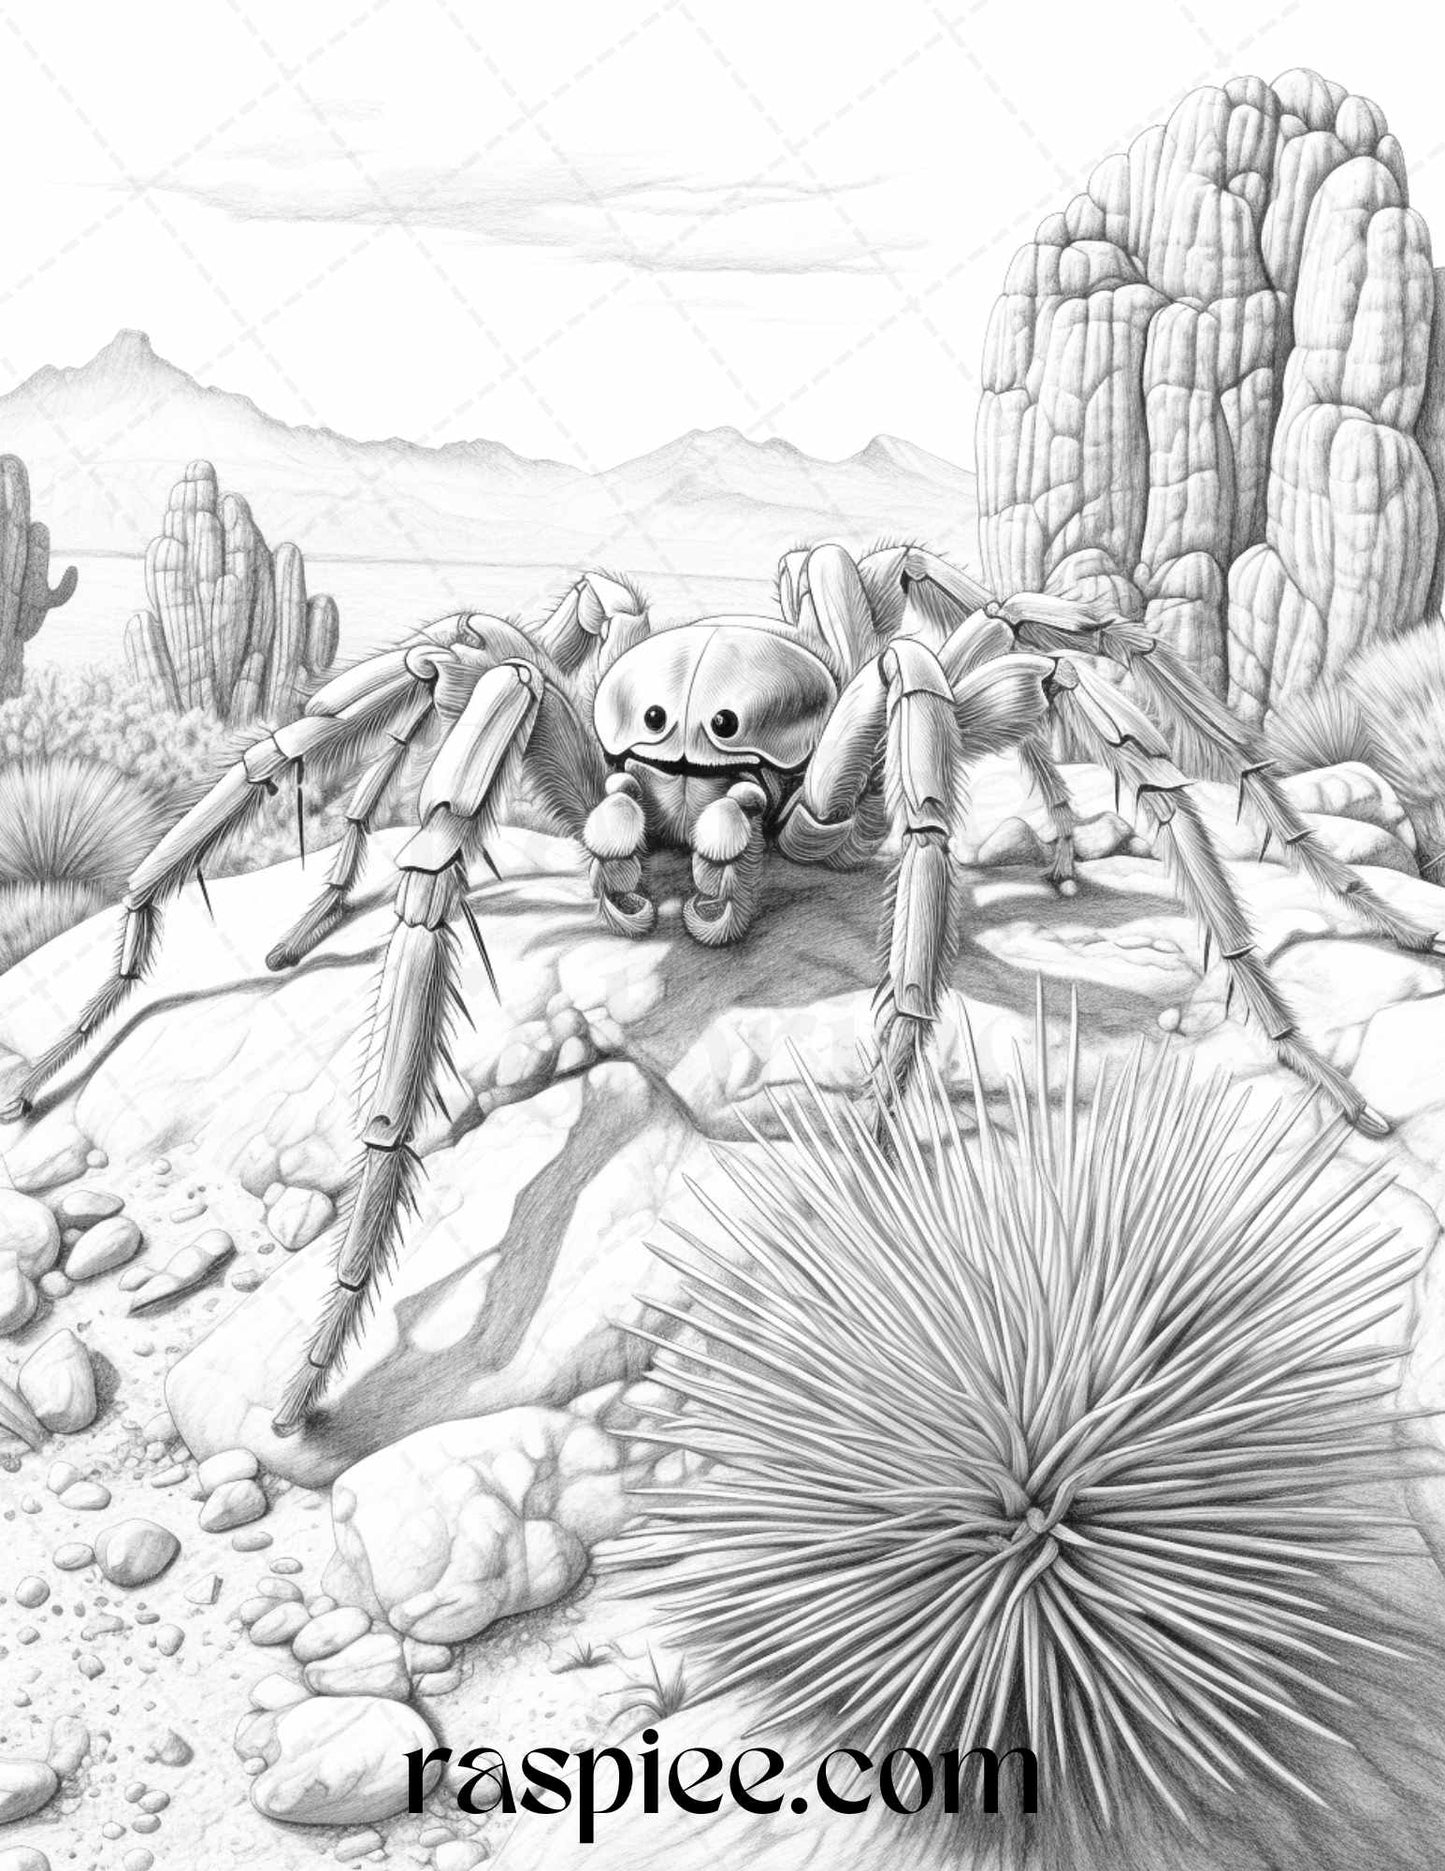 43 Desert Animals Grayscale Coloring Pages Printable for Adults, PDF File Instant Download - Raspiee Coloring